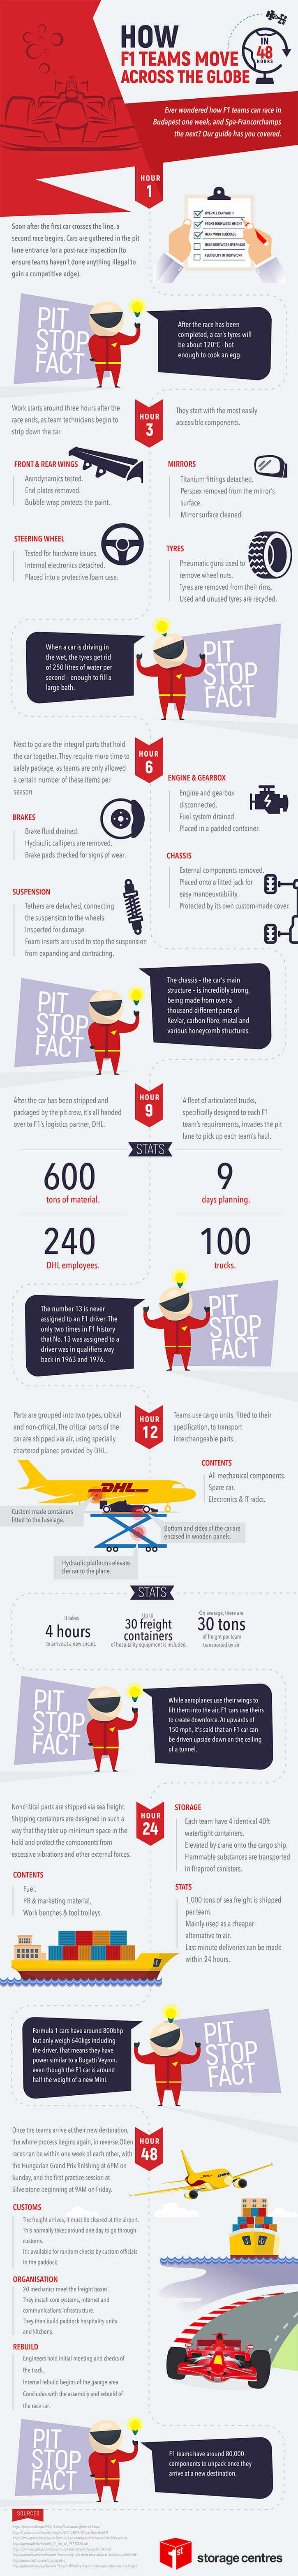 How the Formula One fleet moves on the earth (infographic) 